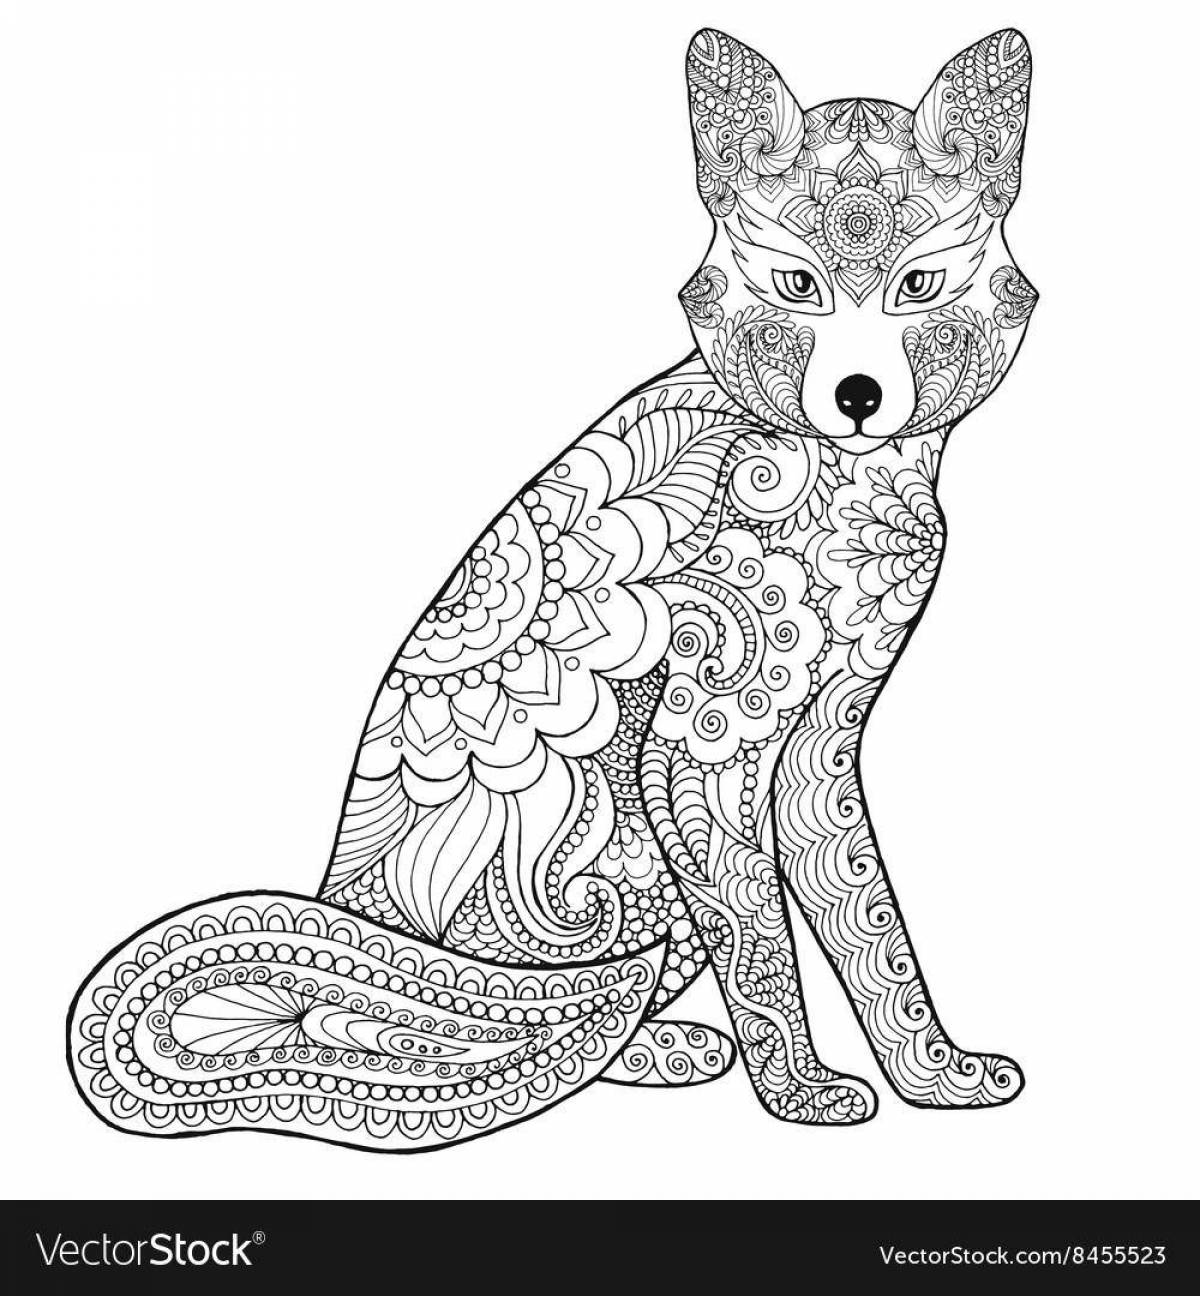 Adorable fox coloring book for adults